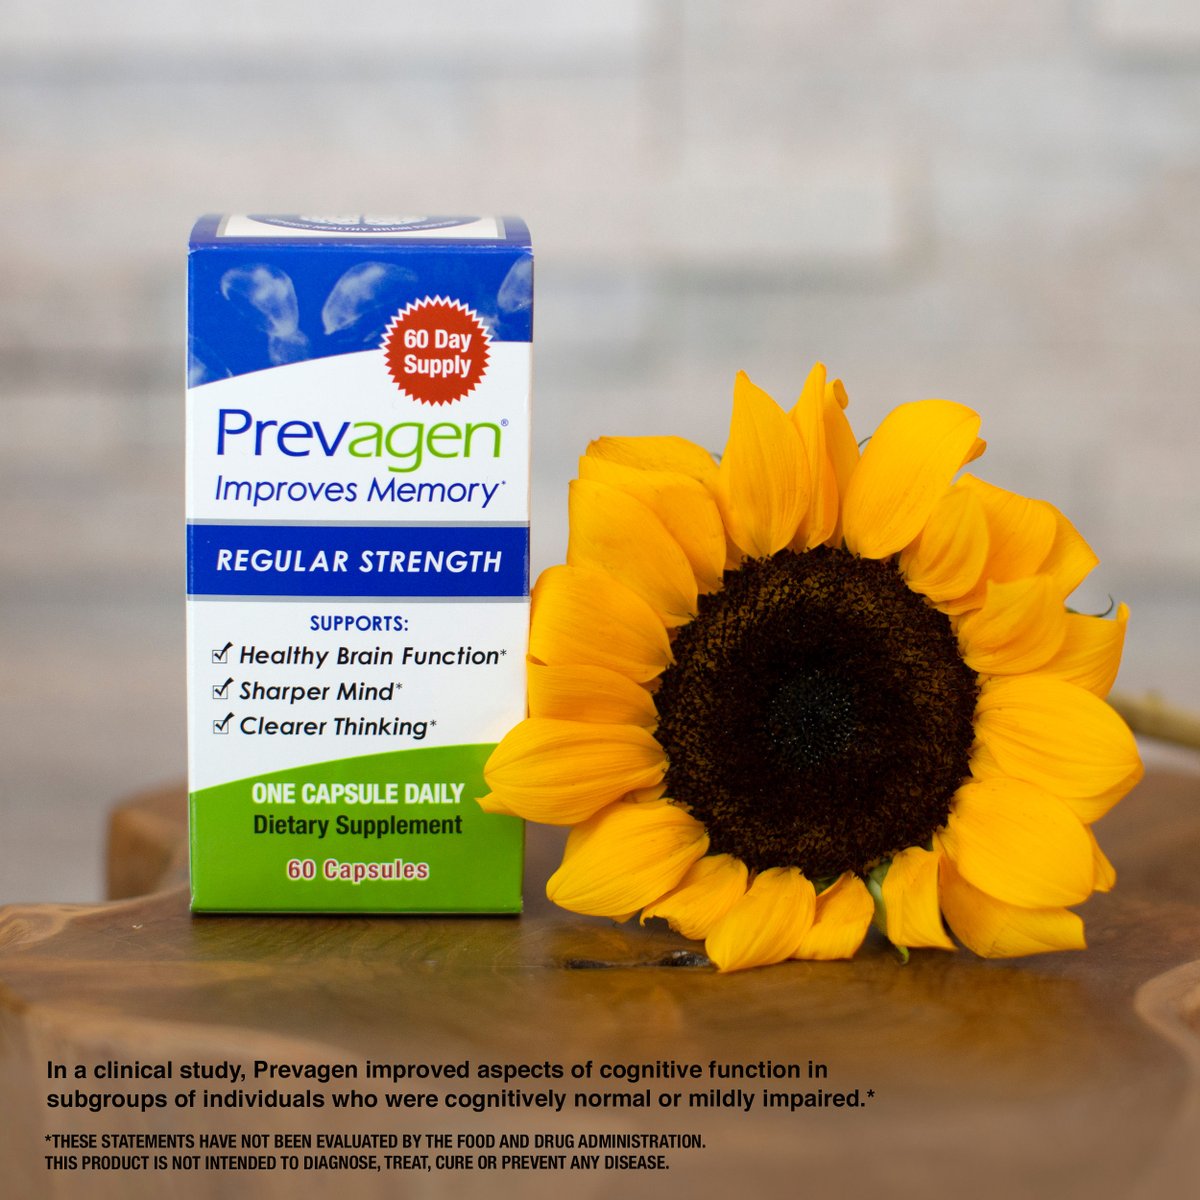 Wishing you a bright day full of sunshine and happiness! 🌻 #prevagen #prevagenreviews …ncy-biosciences-prevagen.visitlink.me/KCc9mX